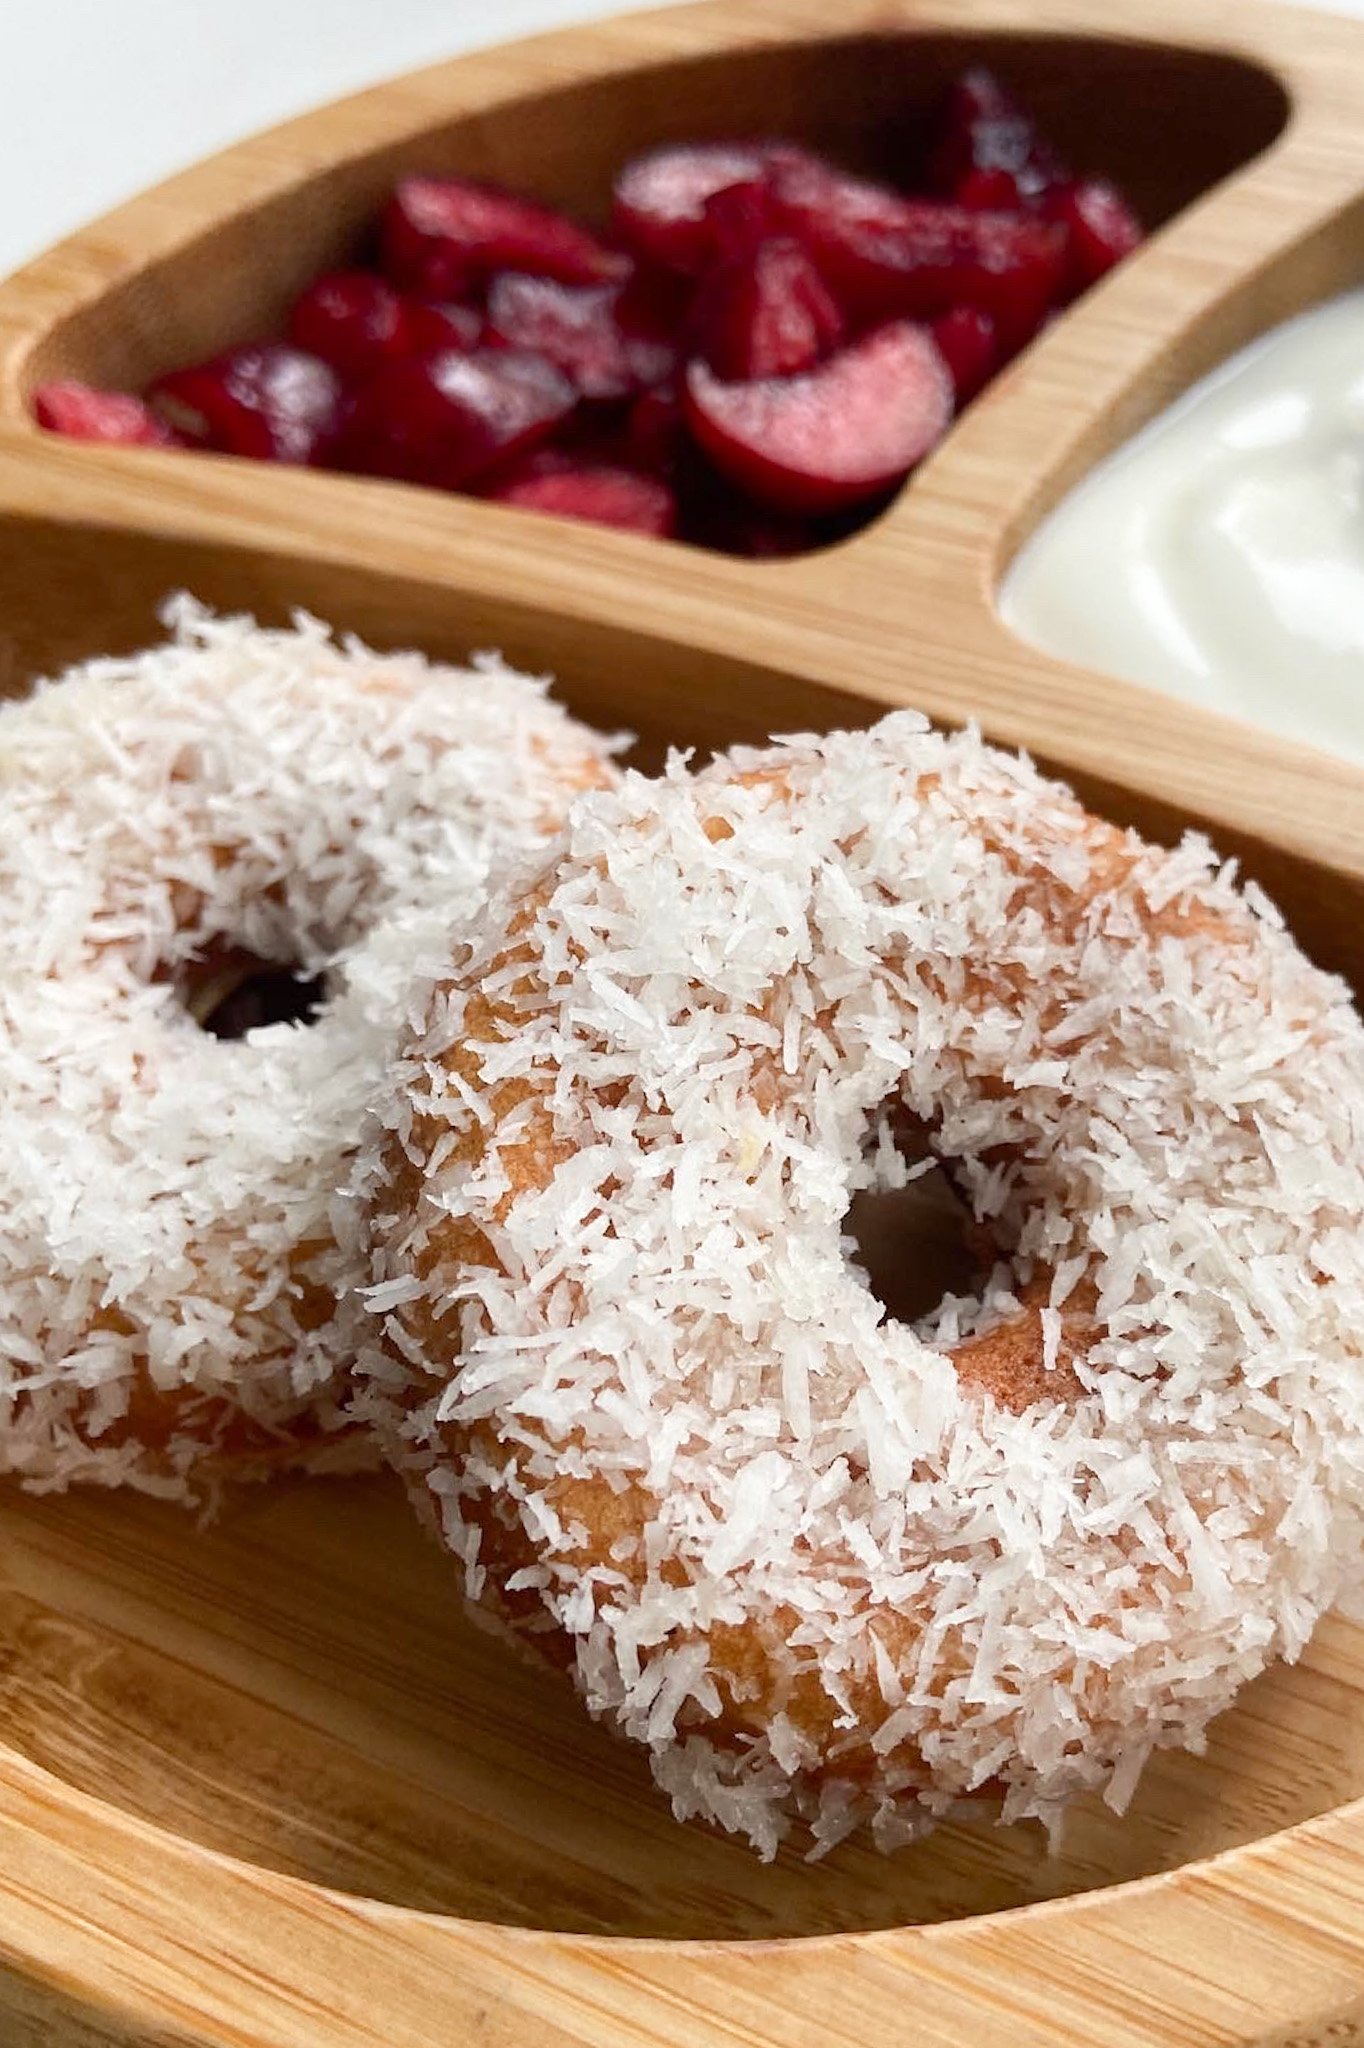 Coconut donuts served with sliced cherries and yogurt